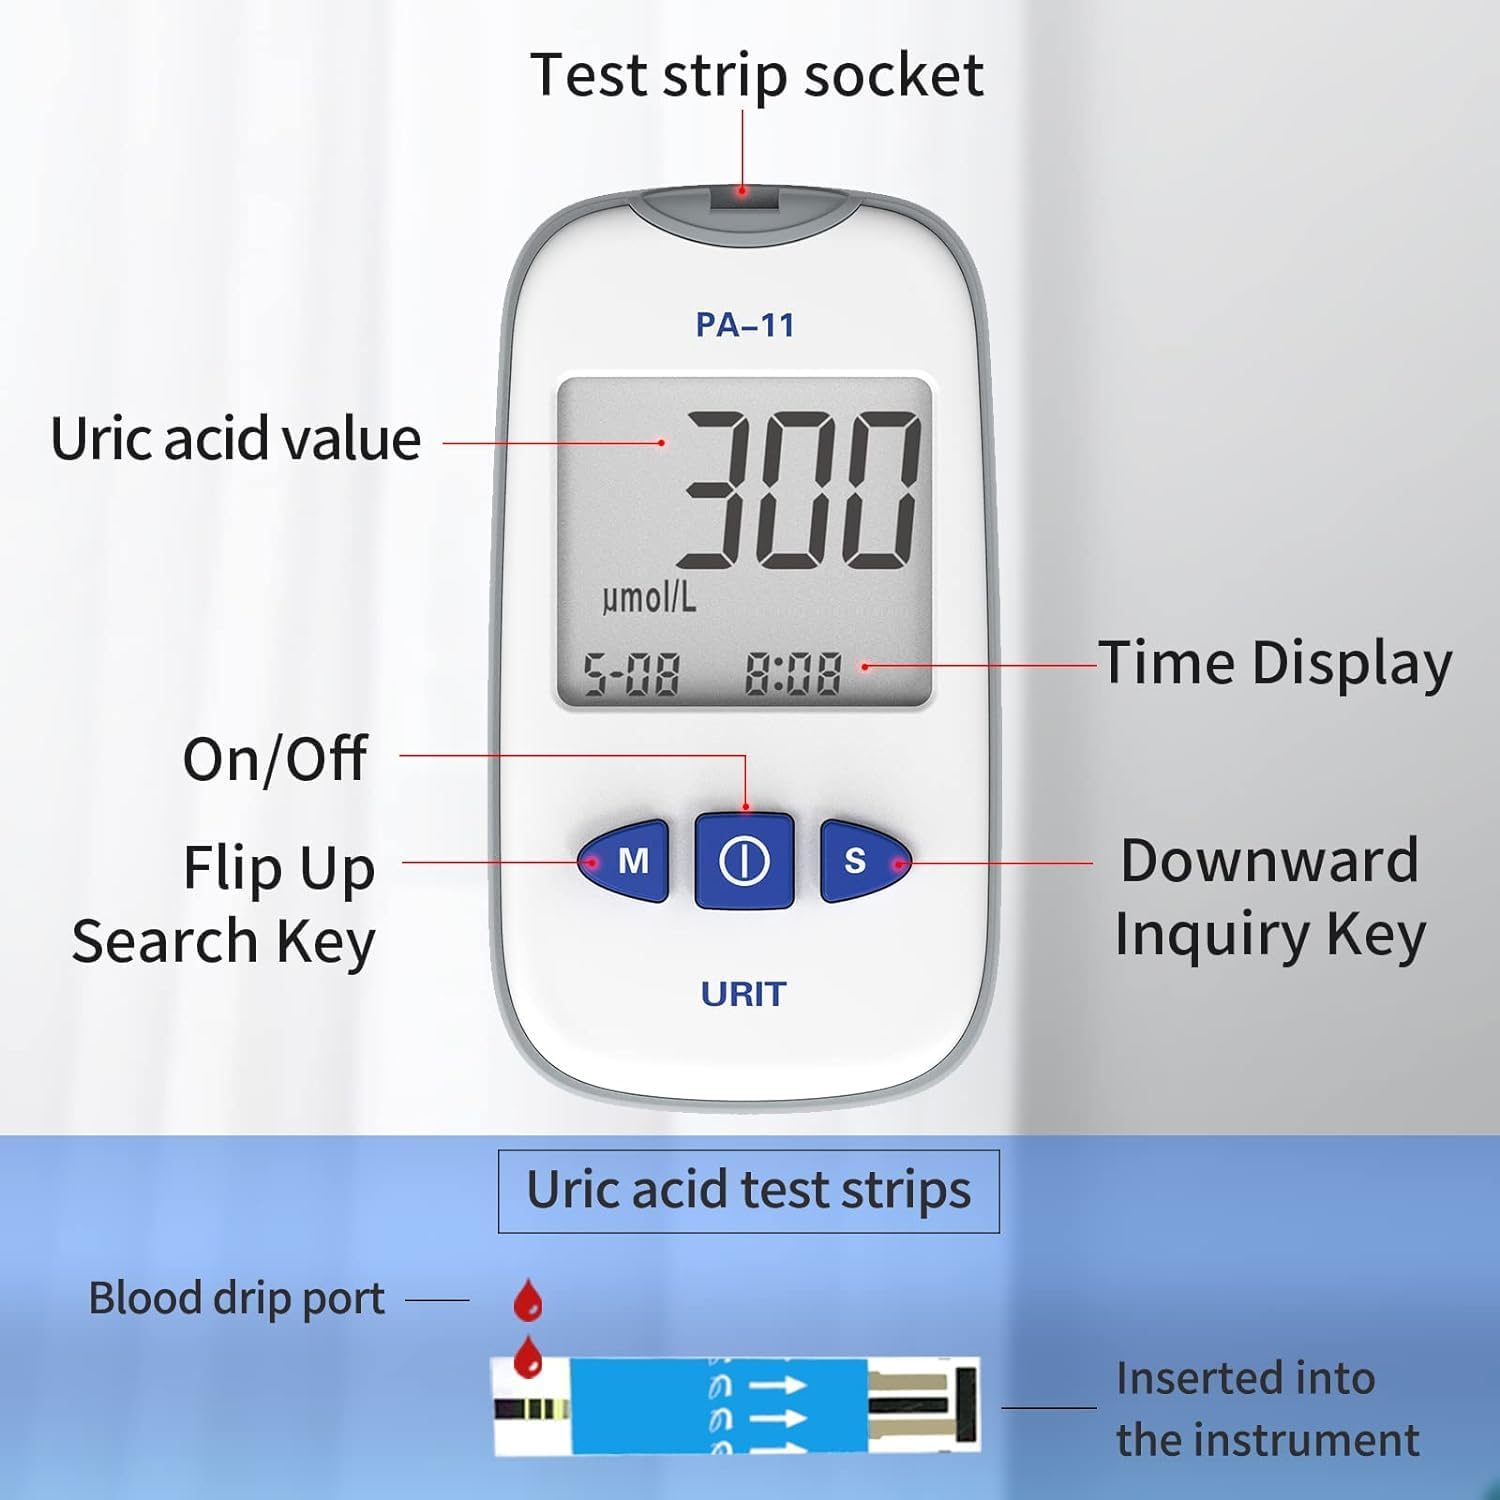 URIT PA-11 Uric Acid Test Kit for Home Use, Uric Acid Test Meter at Home - Includes 25 Test Strips, Lancing Device Lancets-25 Count, Carrying Case